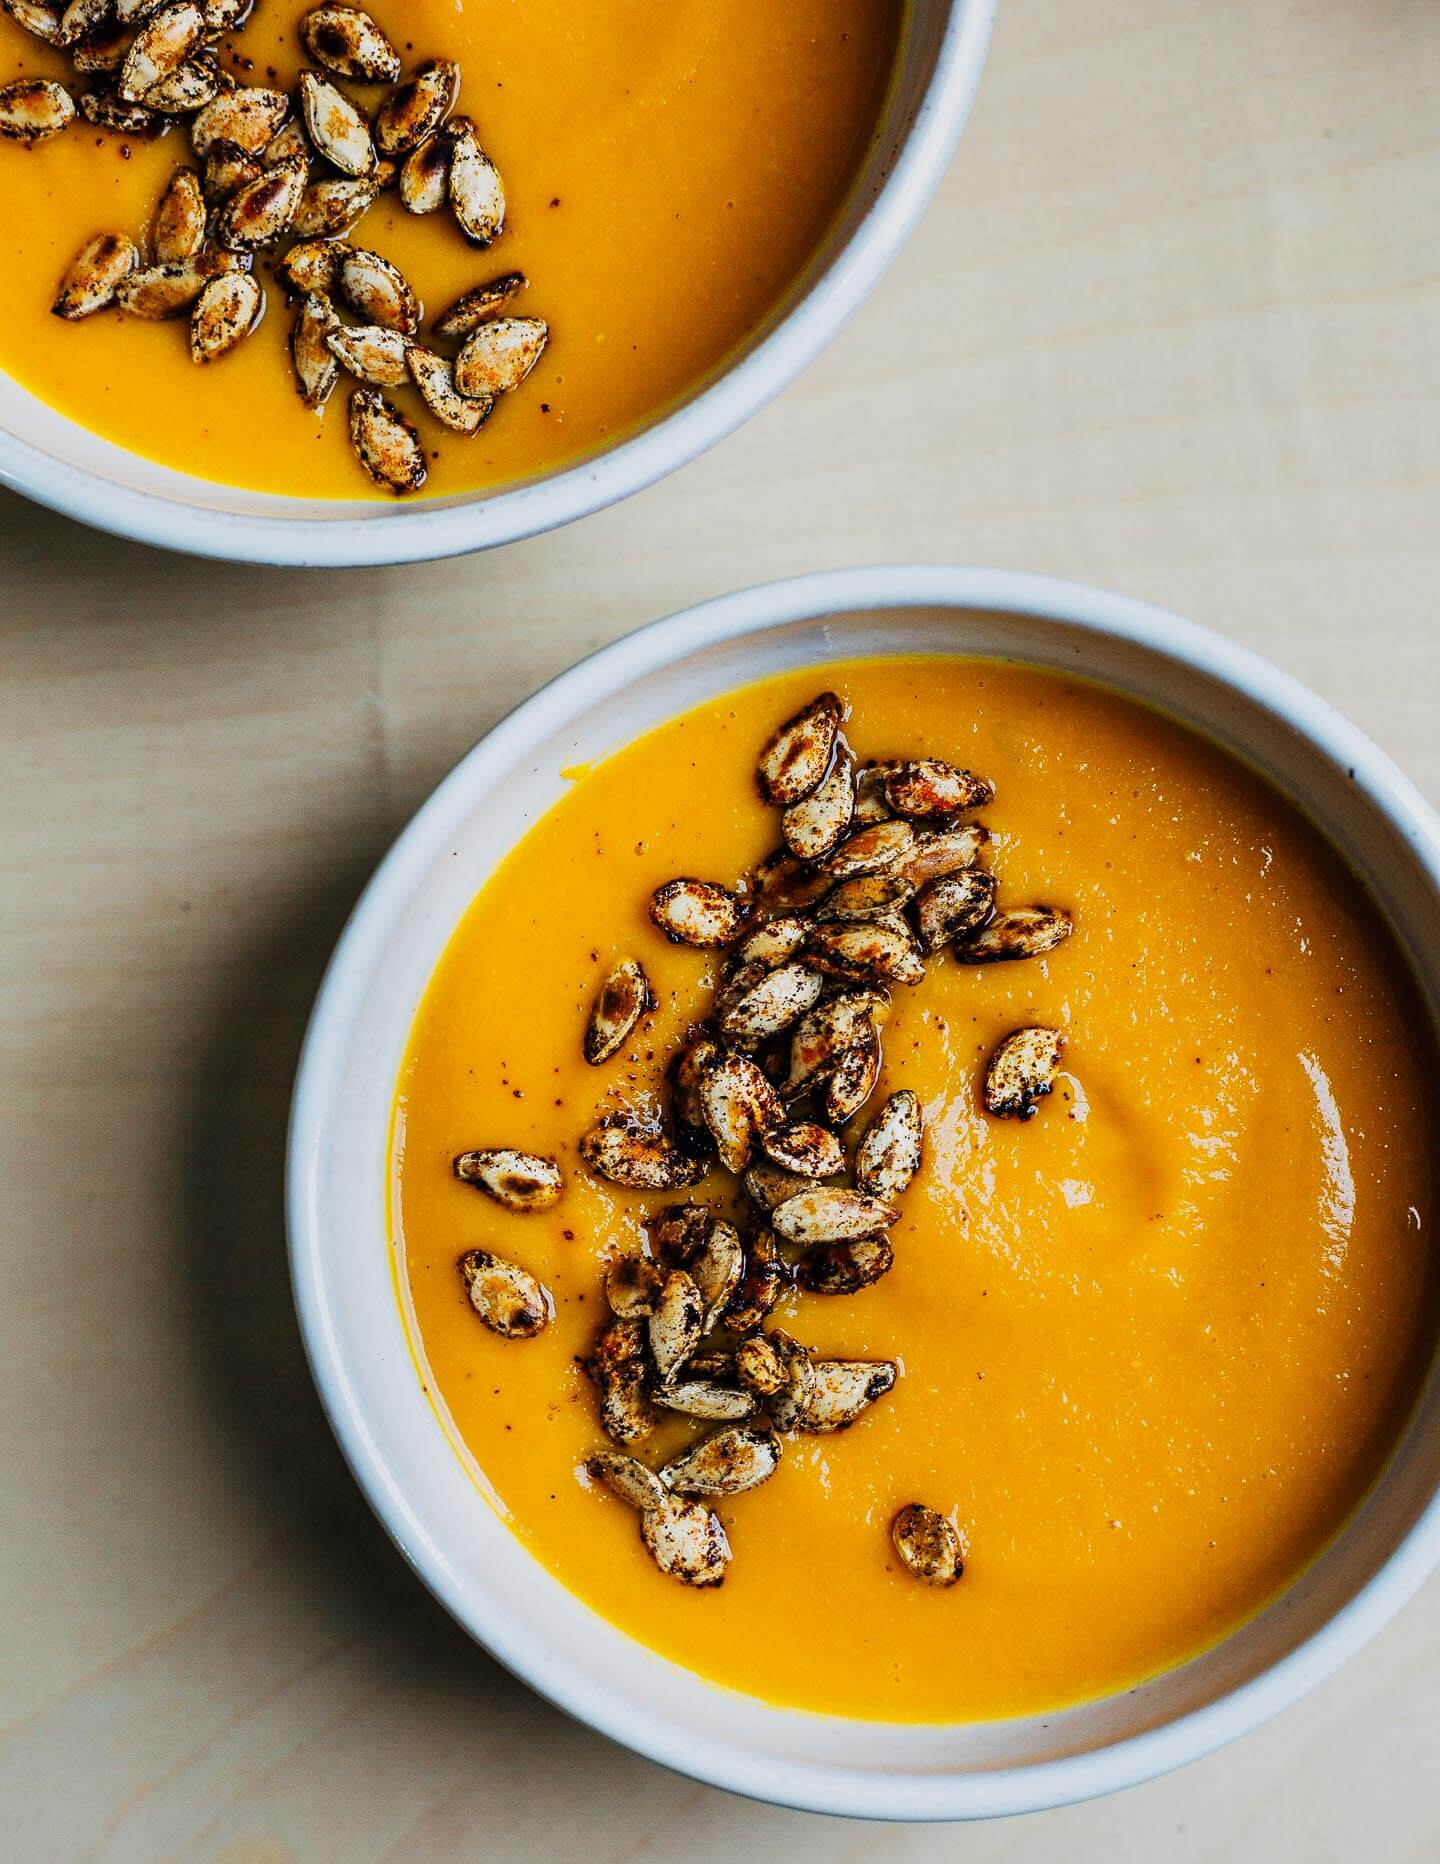 A simple vegan Honeynut squash and apple soup made with fresh ginger, tart apples, and sweet Honeynut squash (or whatever winter squash you happen to have on hand). 